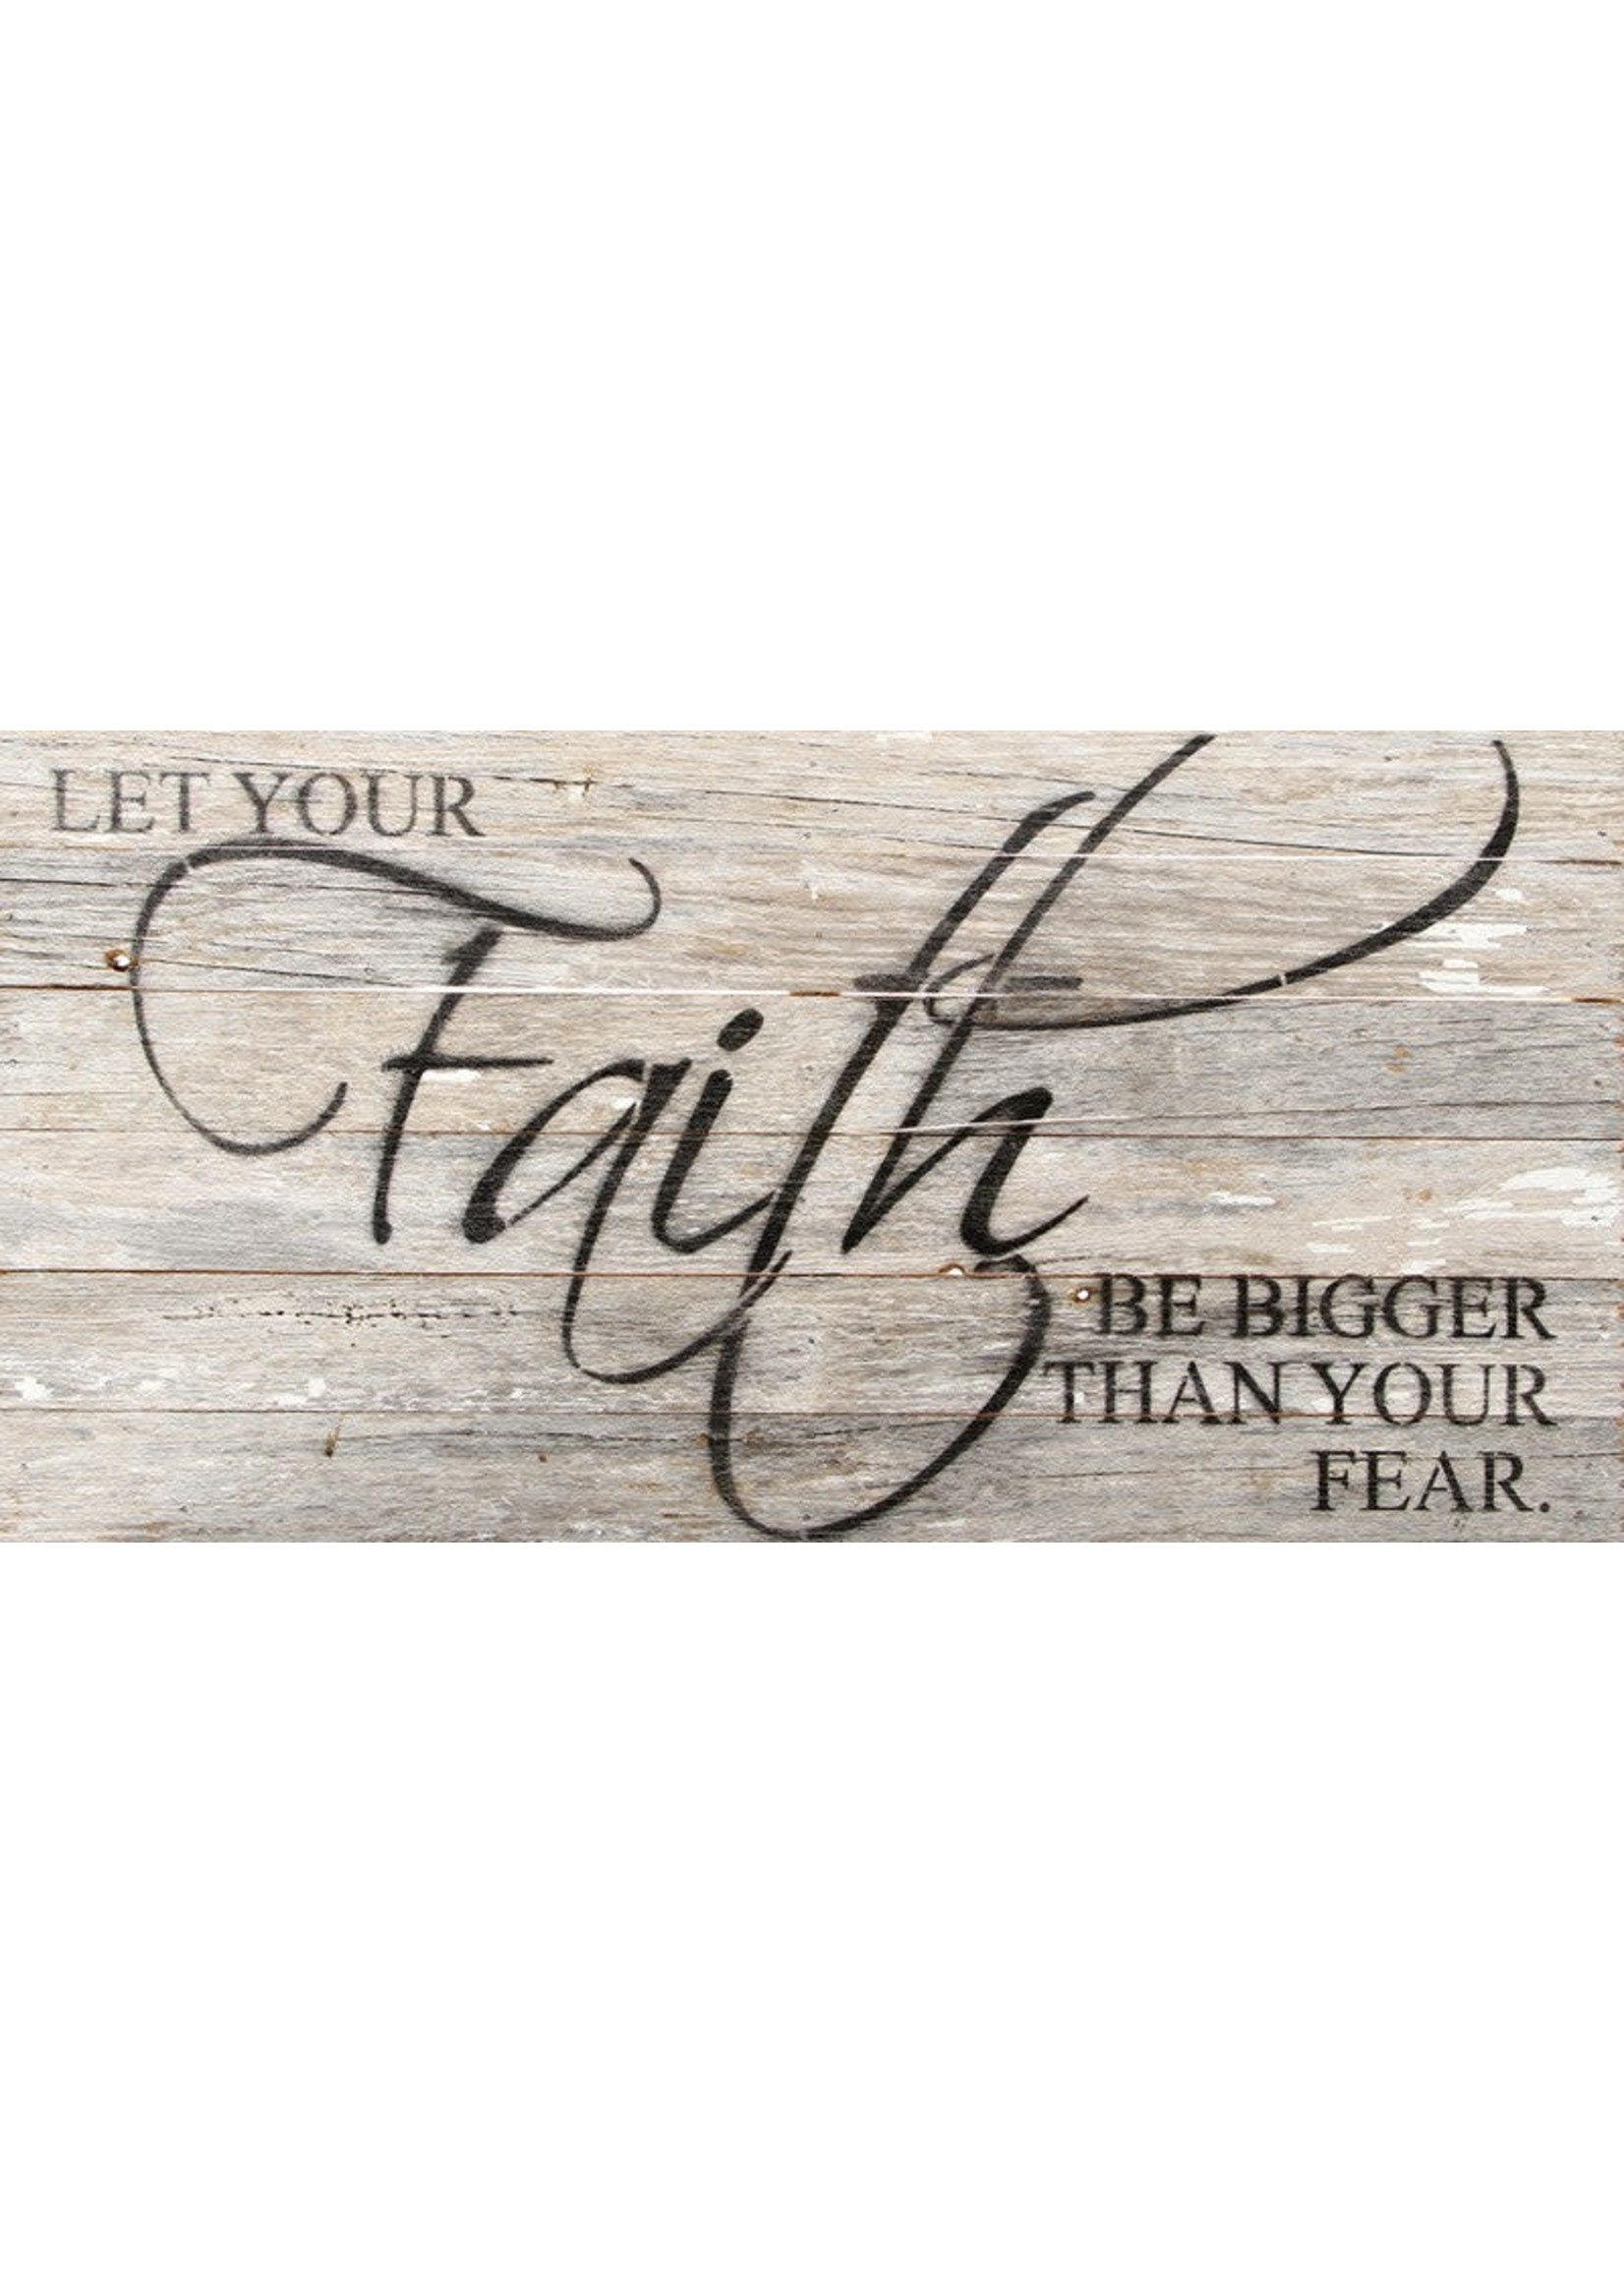 Second Nature by Hand 24x12 Wood Sign "Let your faith be bigger than your fear"